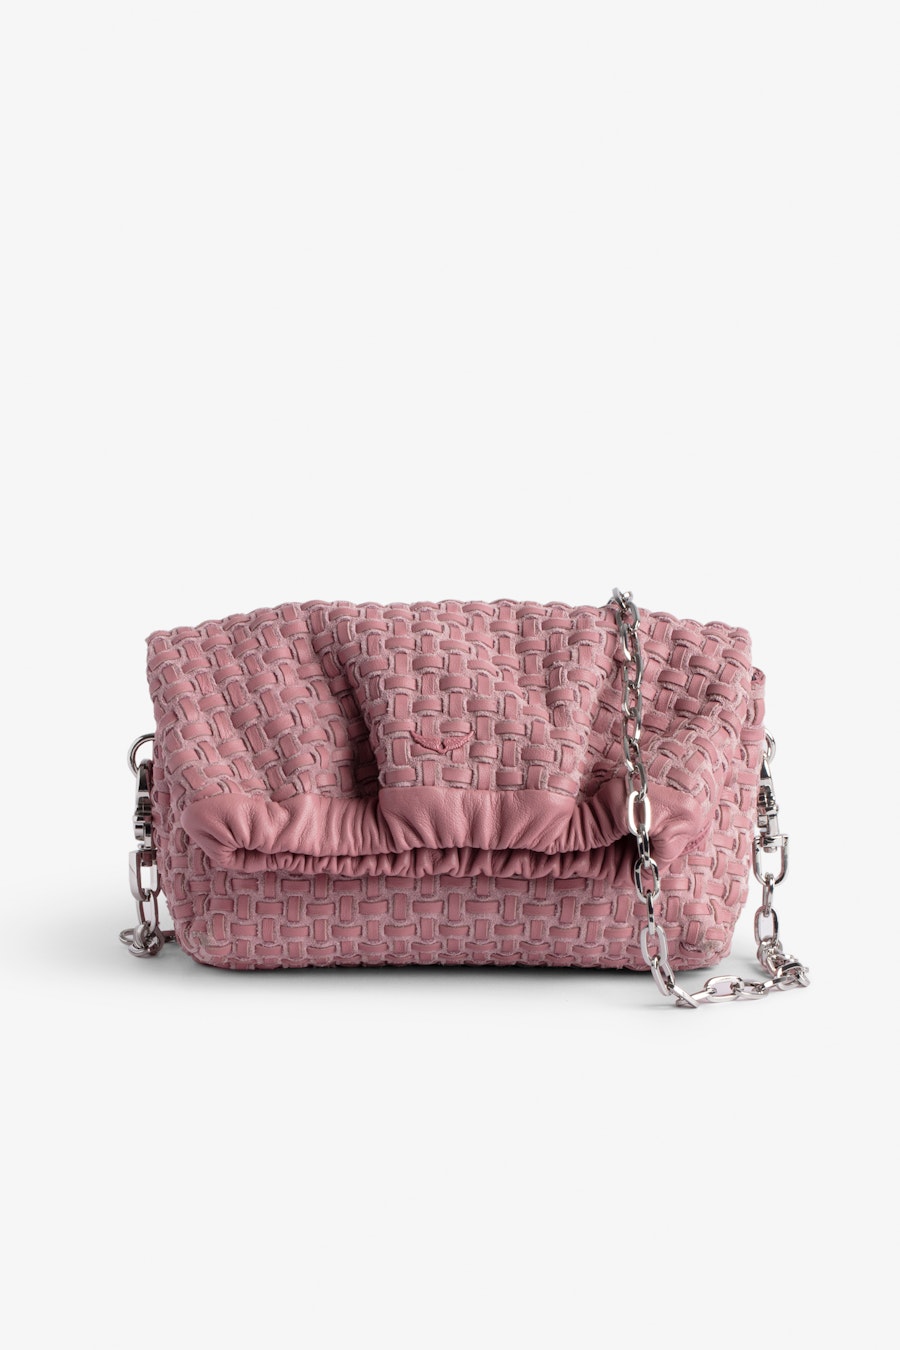 ZADIG&VOLTAIRE Rockyssime Woven XS Bag